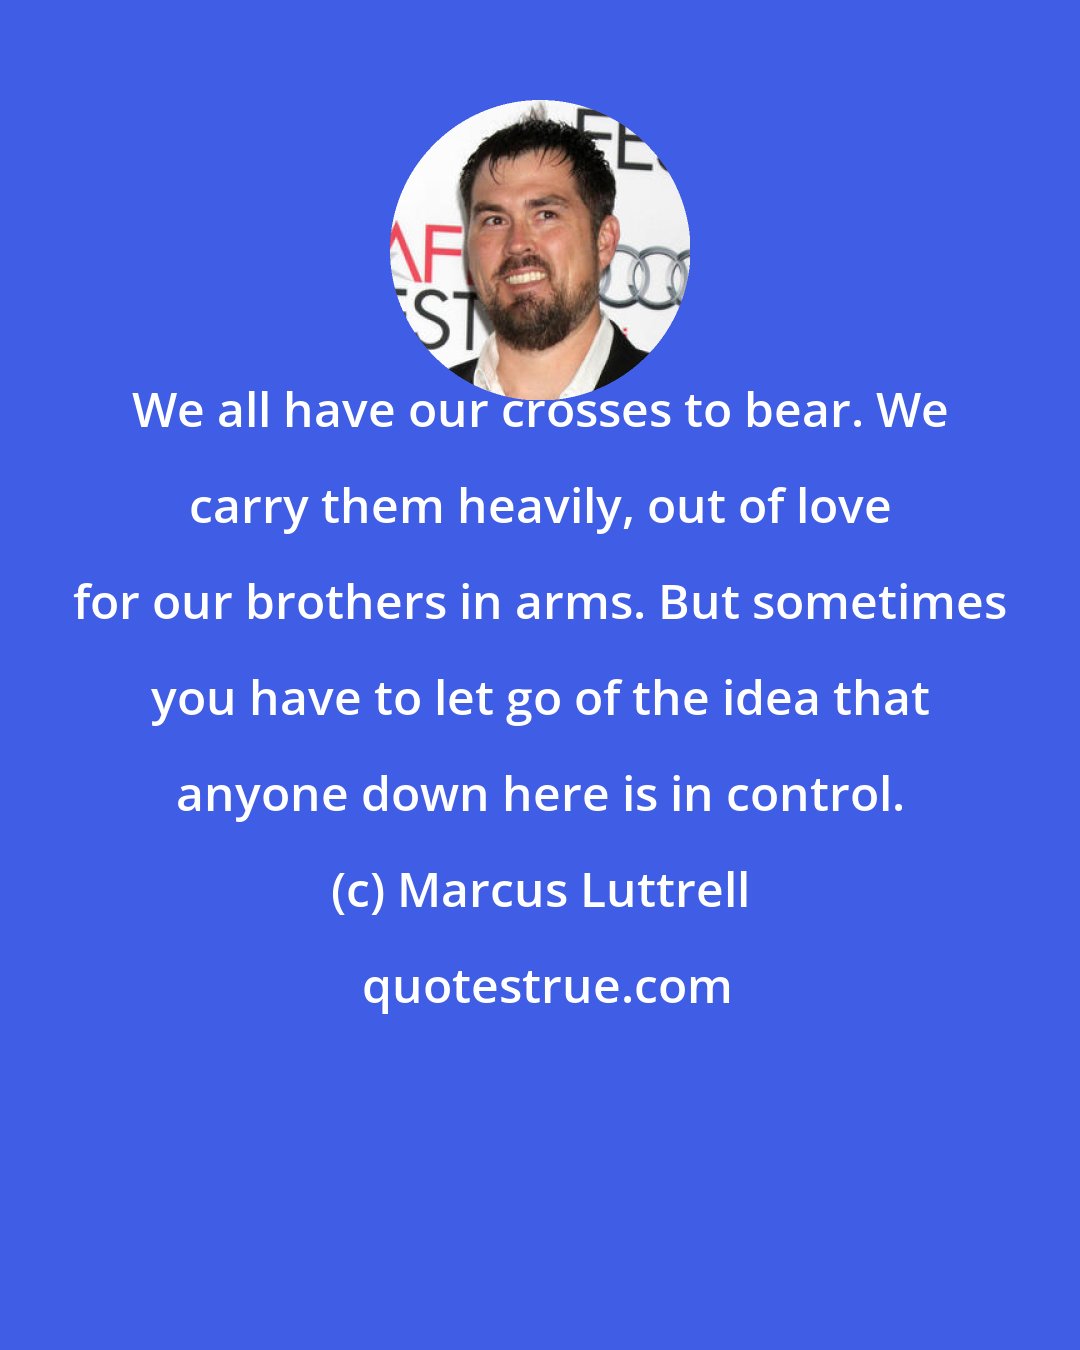 Marcus Luttrell: We all have our crosses to bear. We carry them heavily, out of love for our brothers in arms. But sometimes you have to let go of the idea that anyone down here is in control.